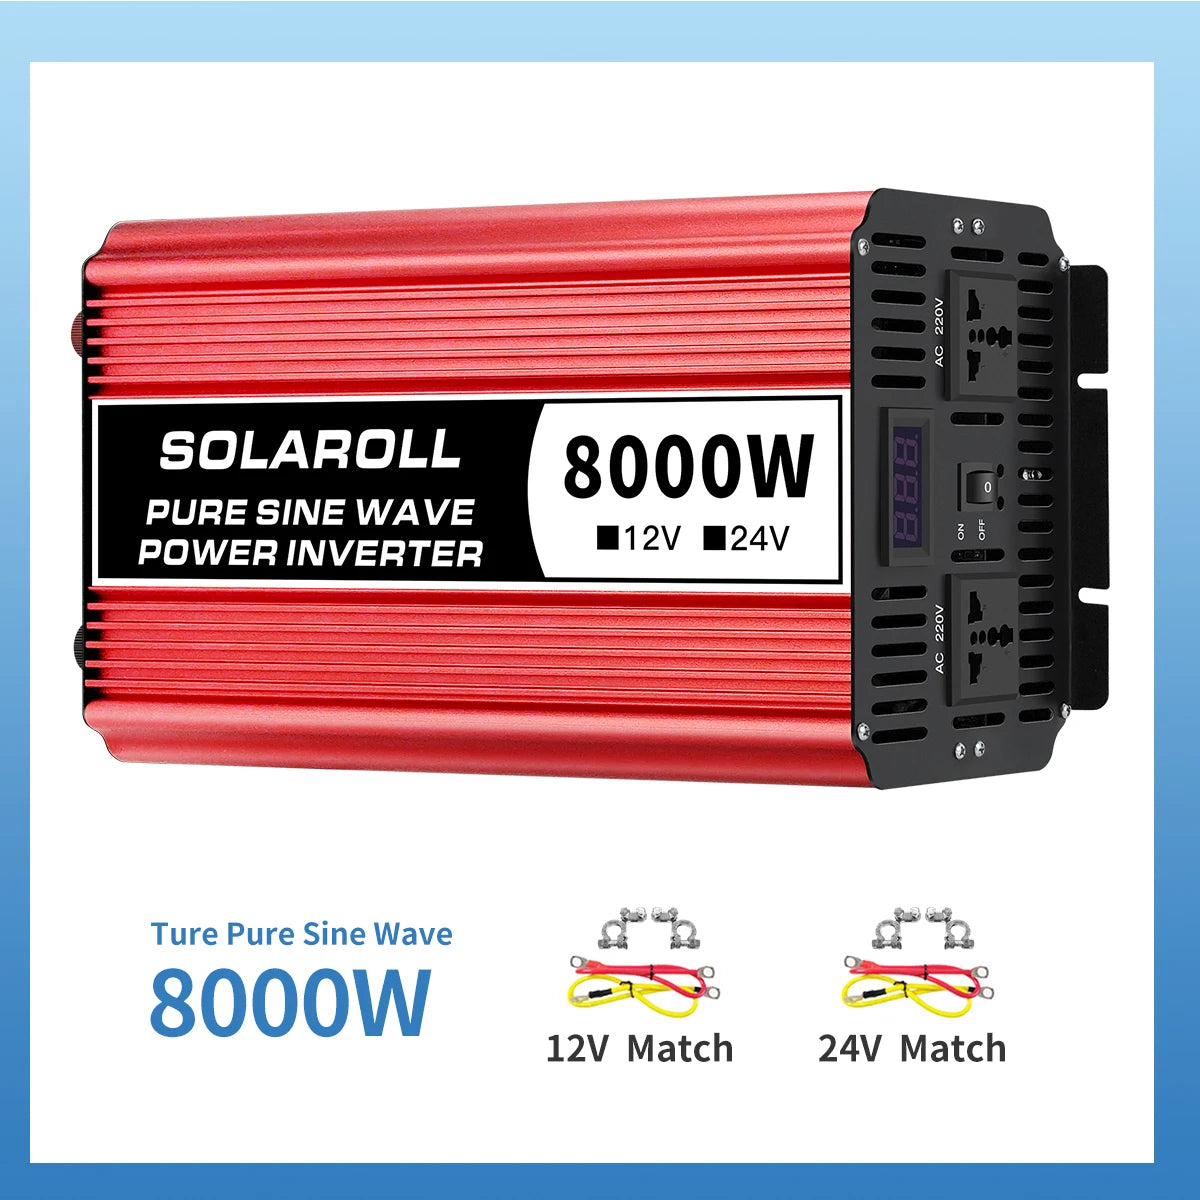 Pure Sine Wave Inverter, SOLAROLL DC/AC Inverter specifications: power outputs from 1500W to 8000W, frequencies at 50HZ or 60HZ.